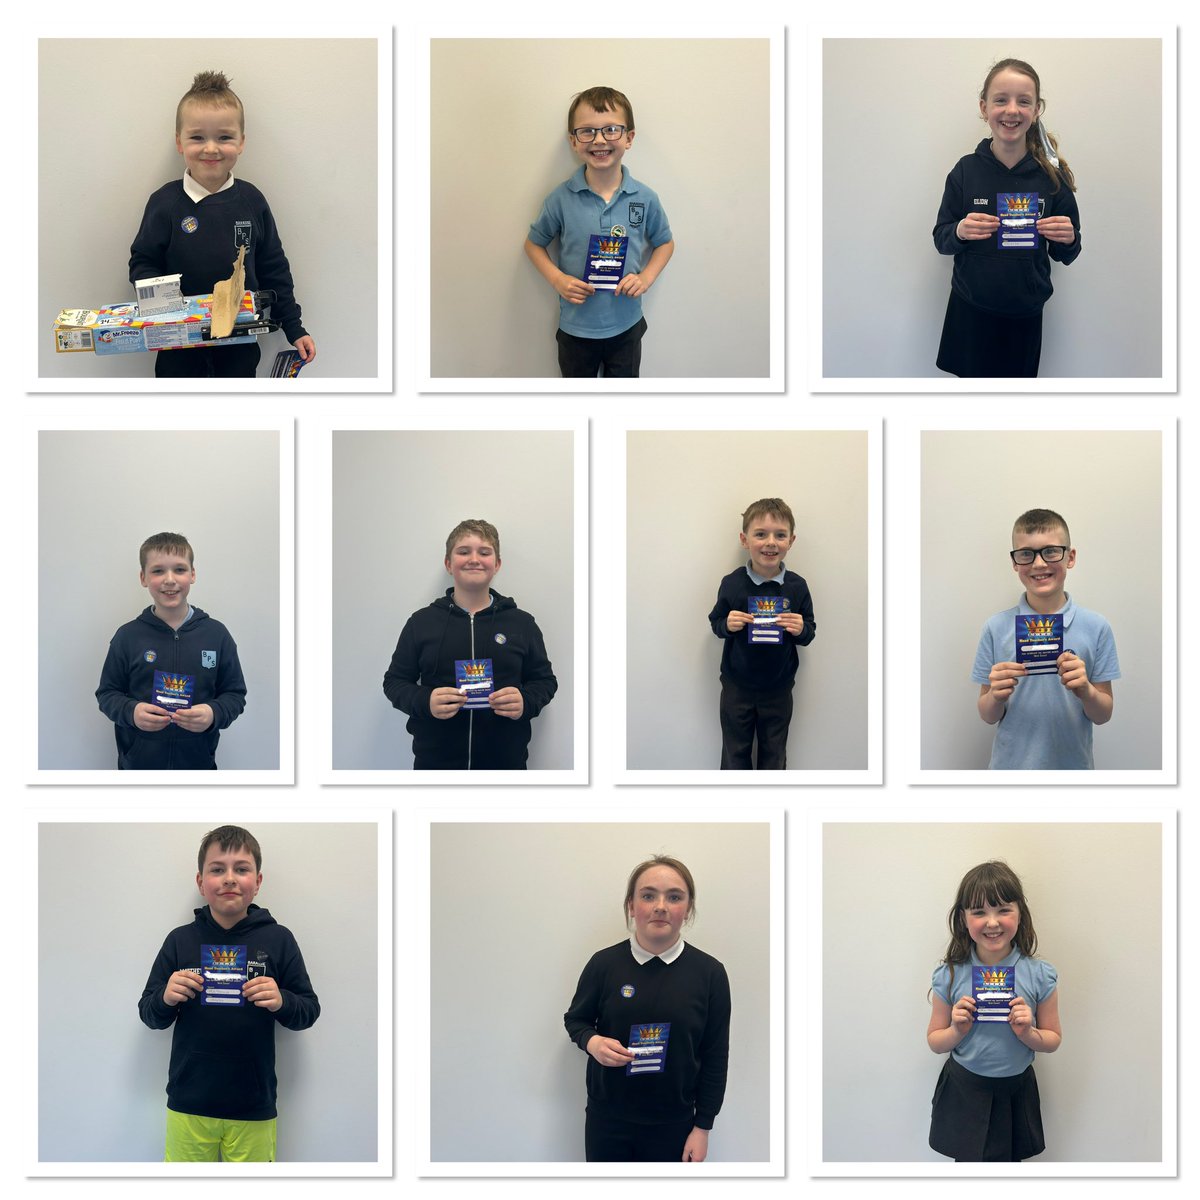 Well done to our first Hot Choc Friday winners of Term 4! We had a great conversation discussing how they have each demonstrated our school values of ambition, creativity, honesty, kindness and respect this week. #growdreamachievetogether